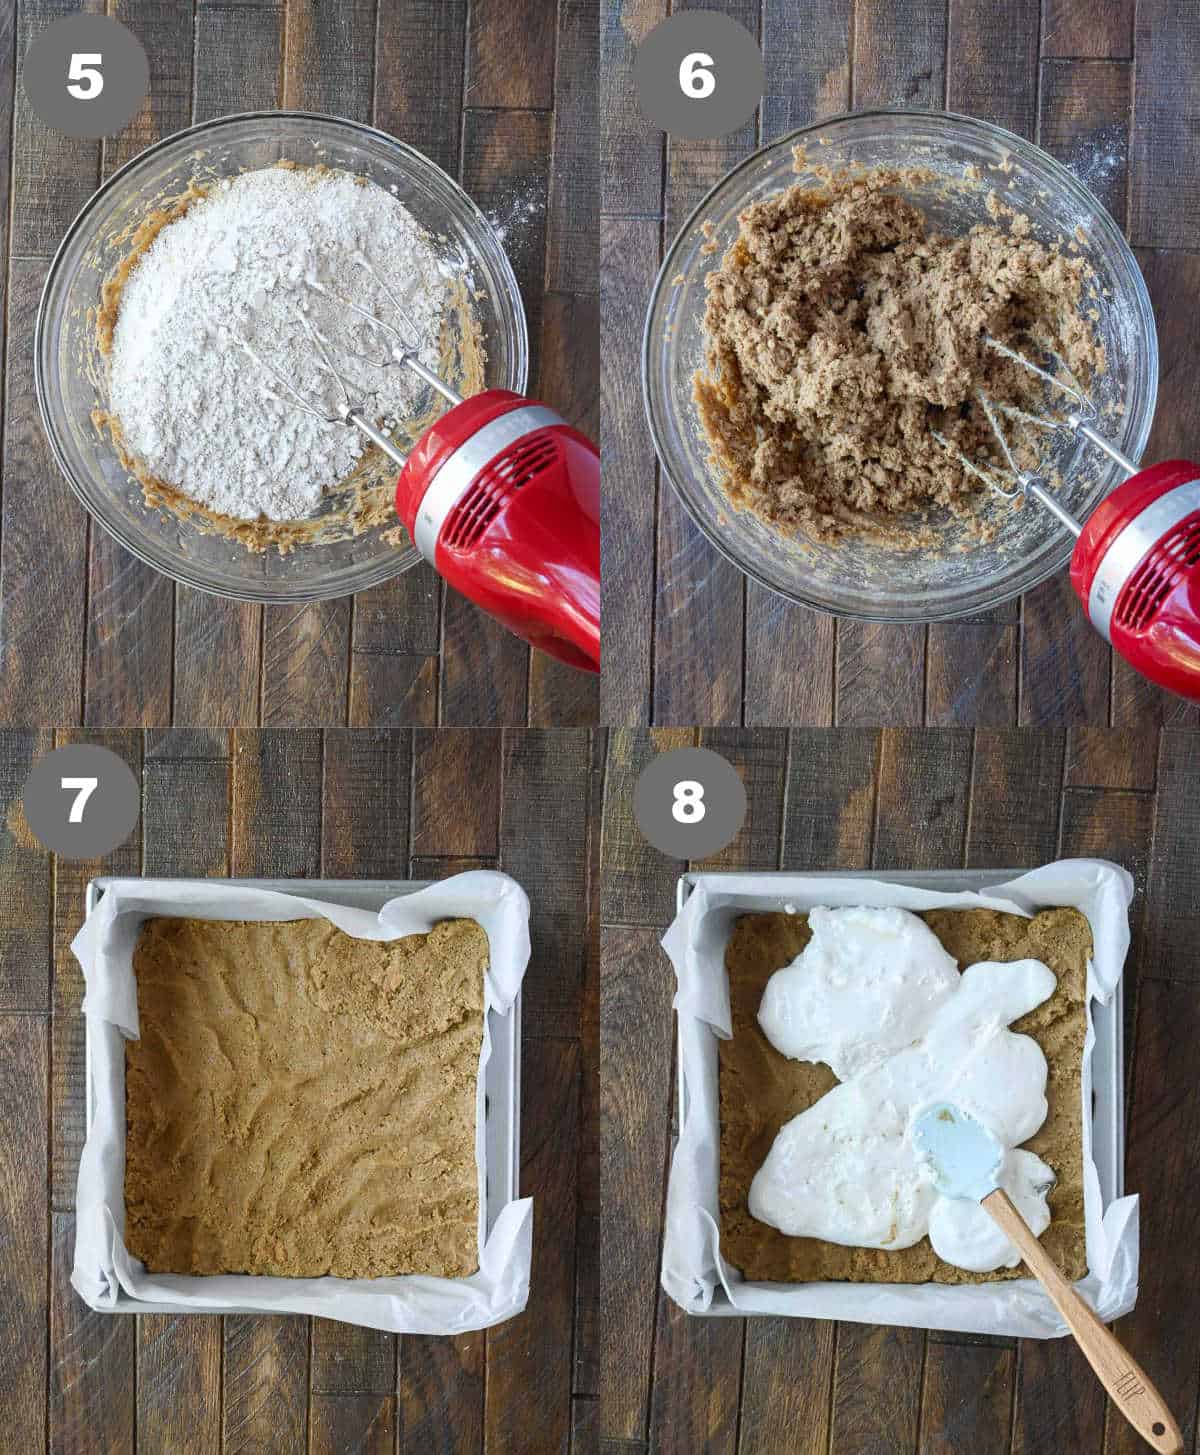 The dry ingredients mixed into the wet then some of the dough pressed into a baking pan followed by marshmallow creme on top.